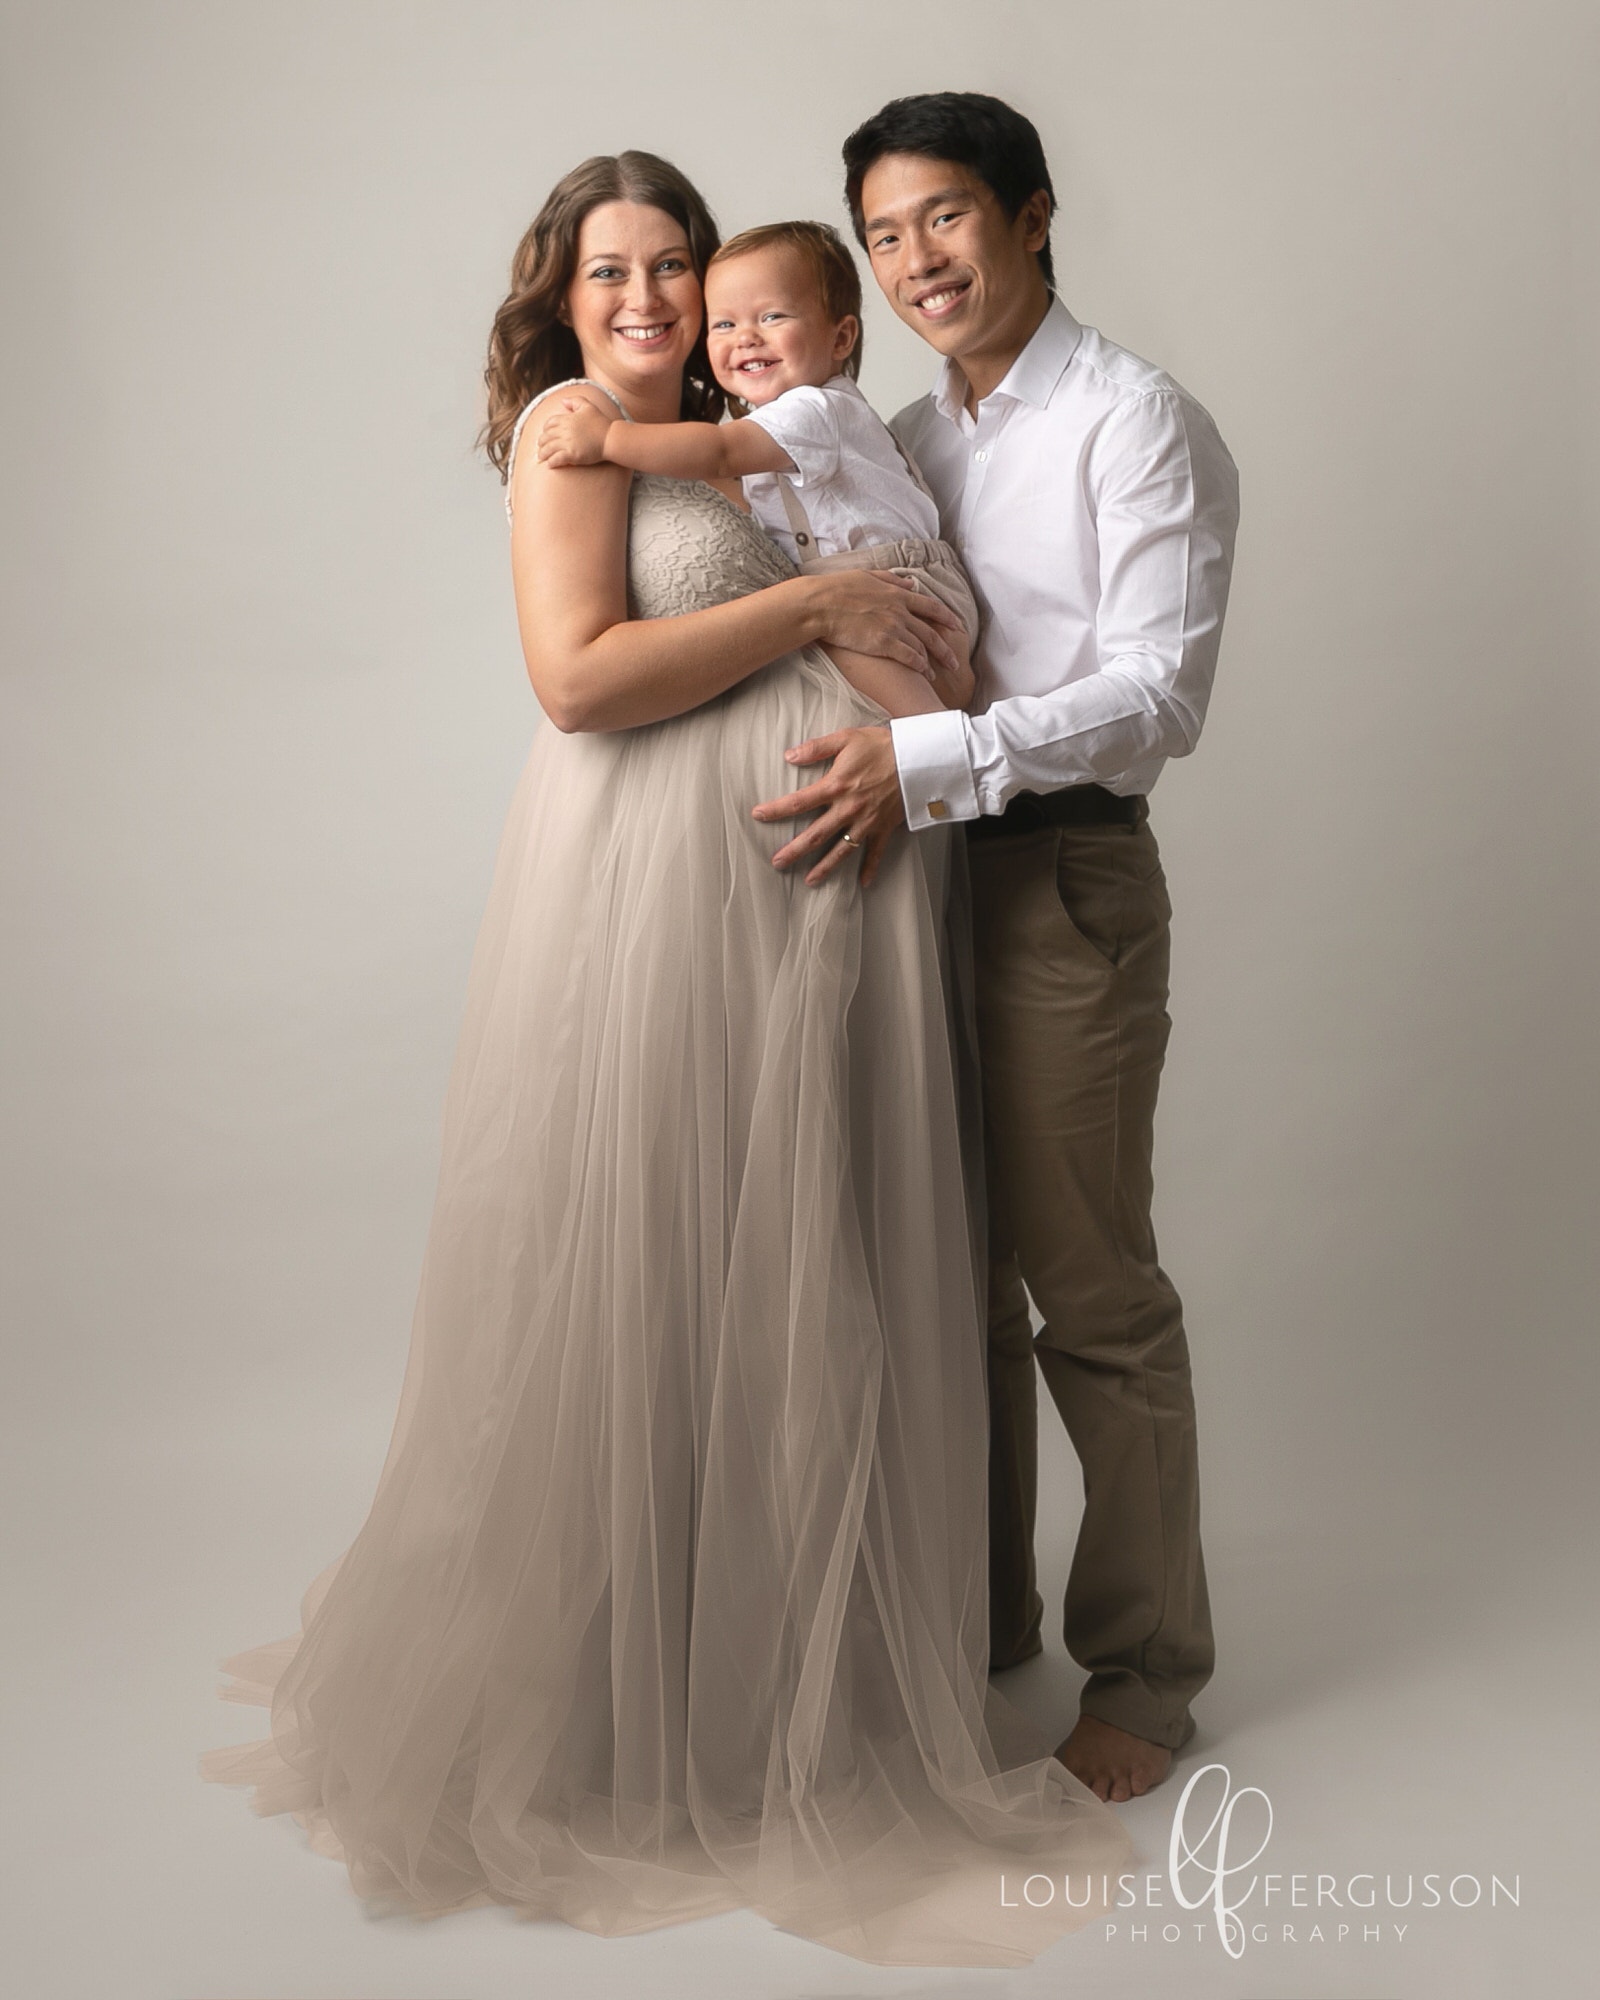 Image taken by Maternity Photographer in Glasgow. Male & female with male toddler. Female is pregnant and wearing a cream gown with tulle skirt, She is holding toddler on her bump and male has his arms around her. Male wears a white shirt & chinos